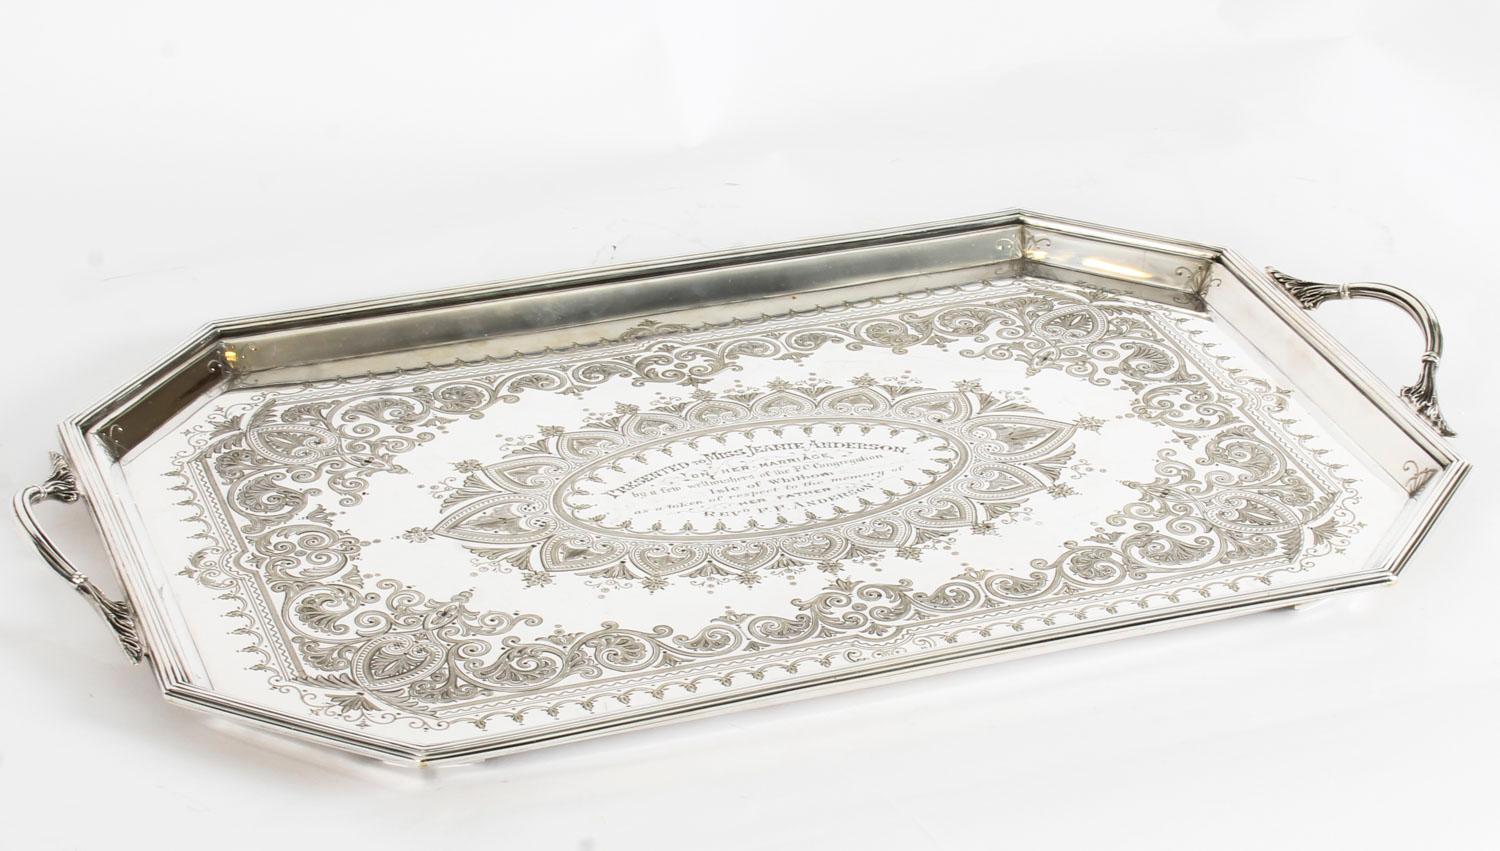 Neoclassical Antique Victorian Silver Plated Service Tray Thomas Latham, 19th Century